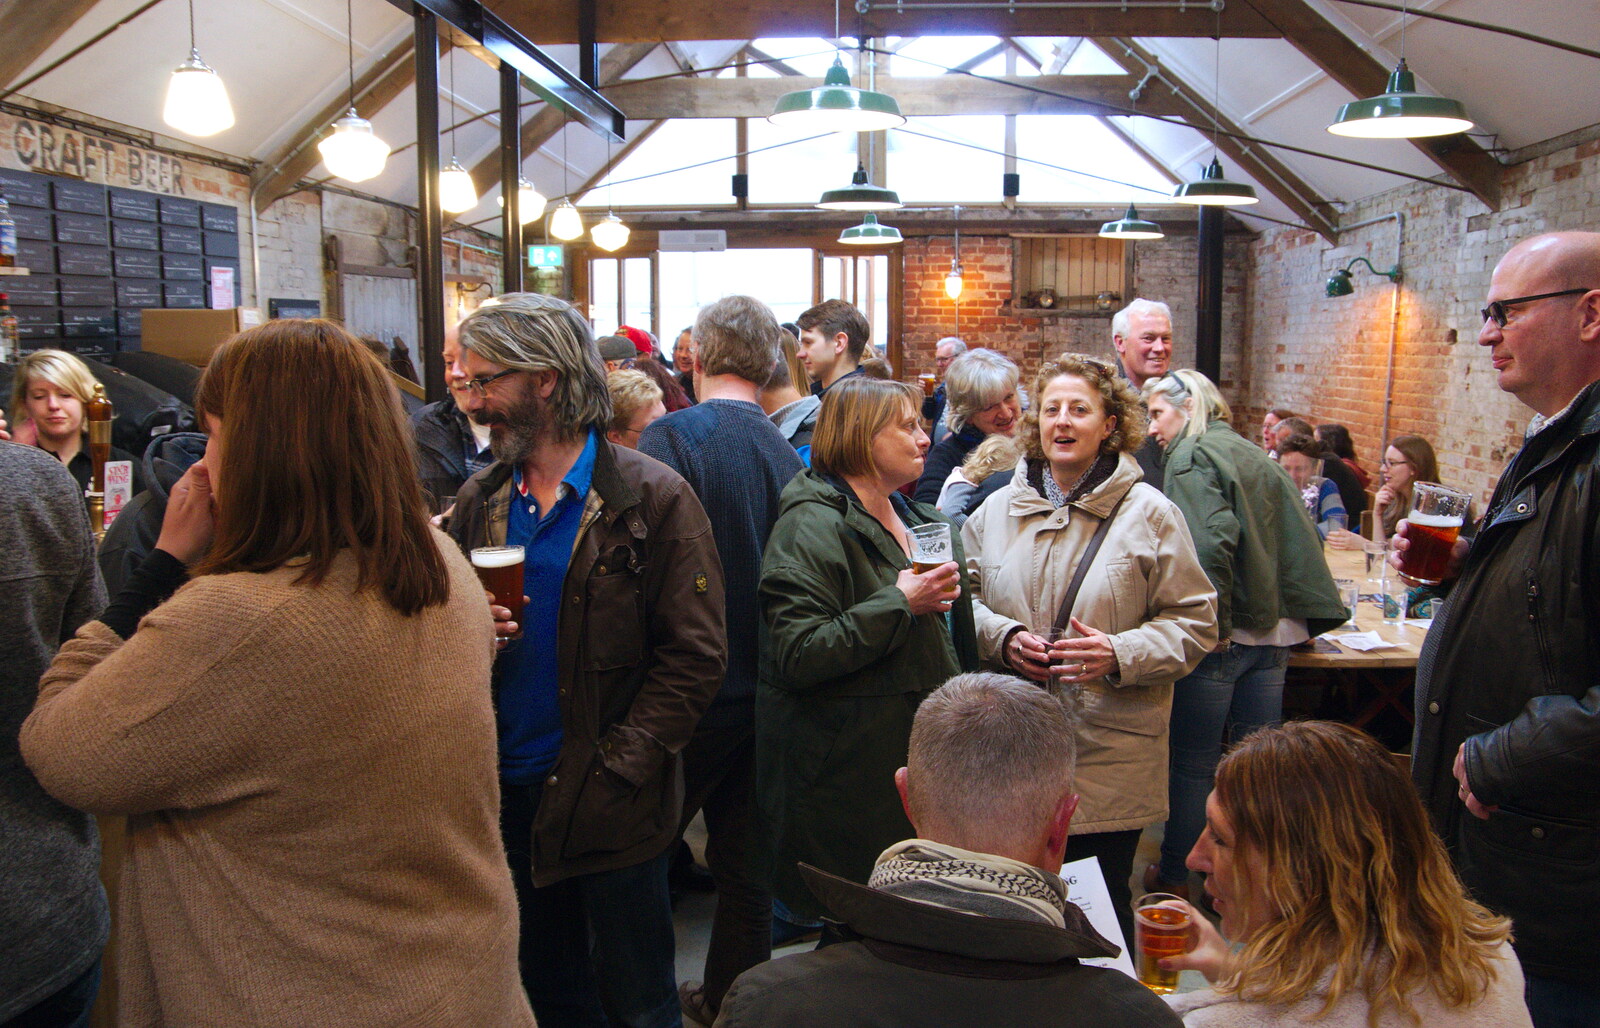 More crowds from The Opening of Star Wing Brewery's Tap Room, Redgrave, Suffolk - 4th May 2019